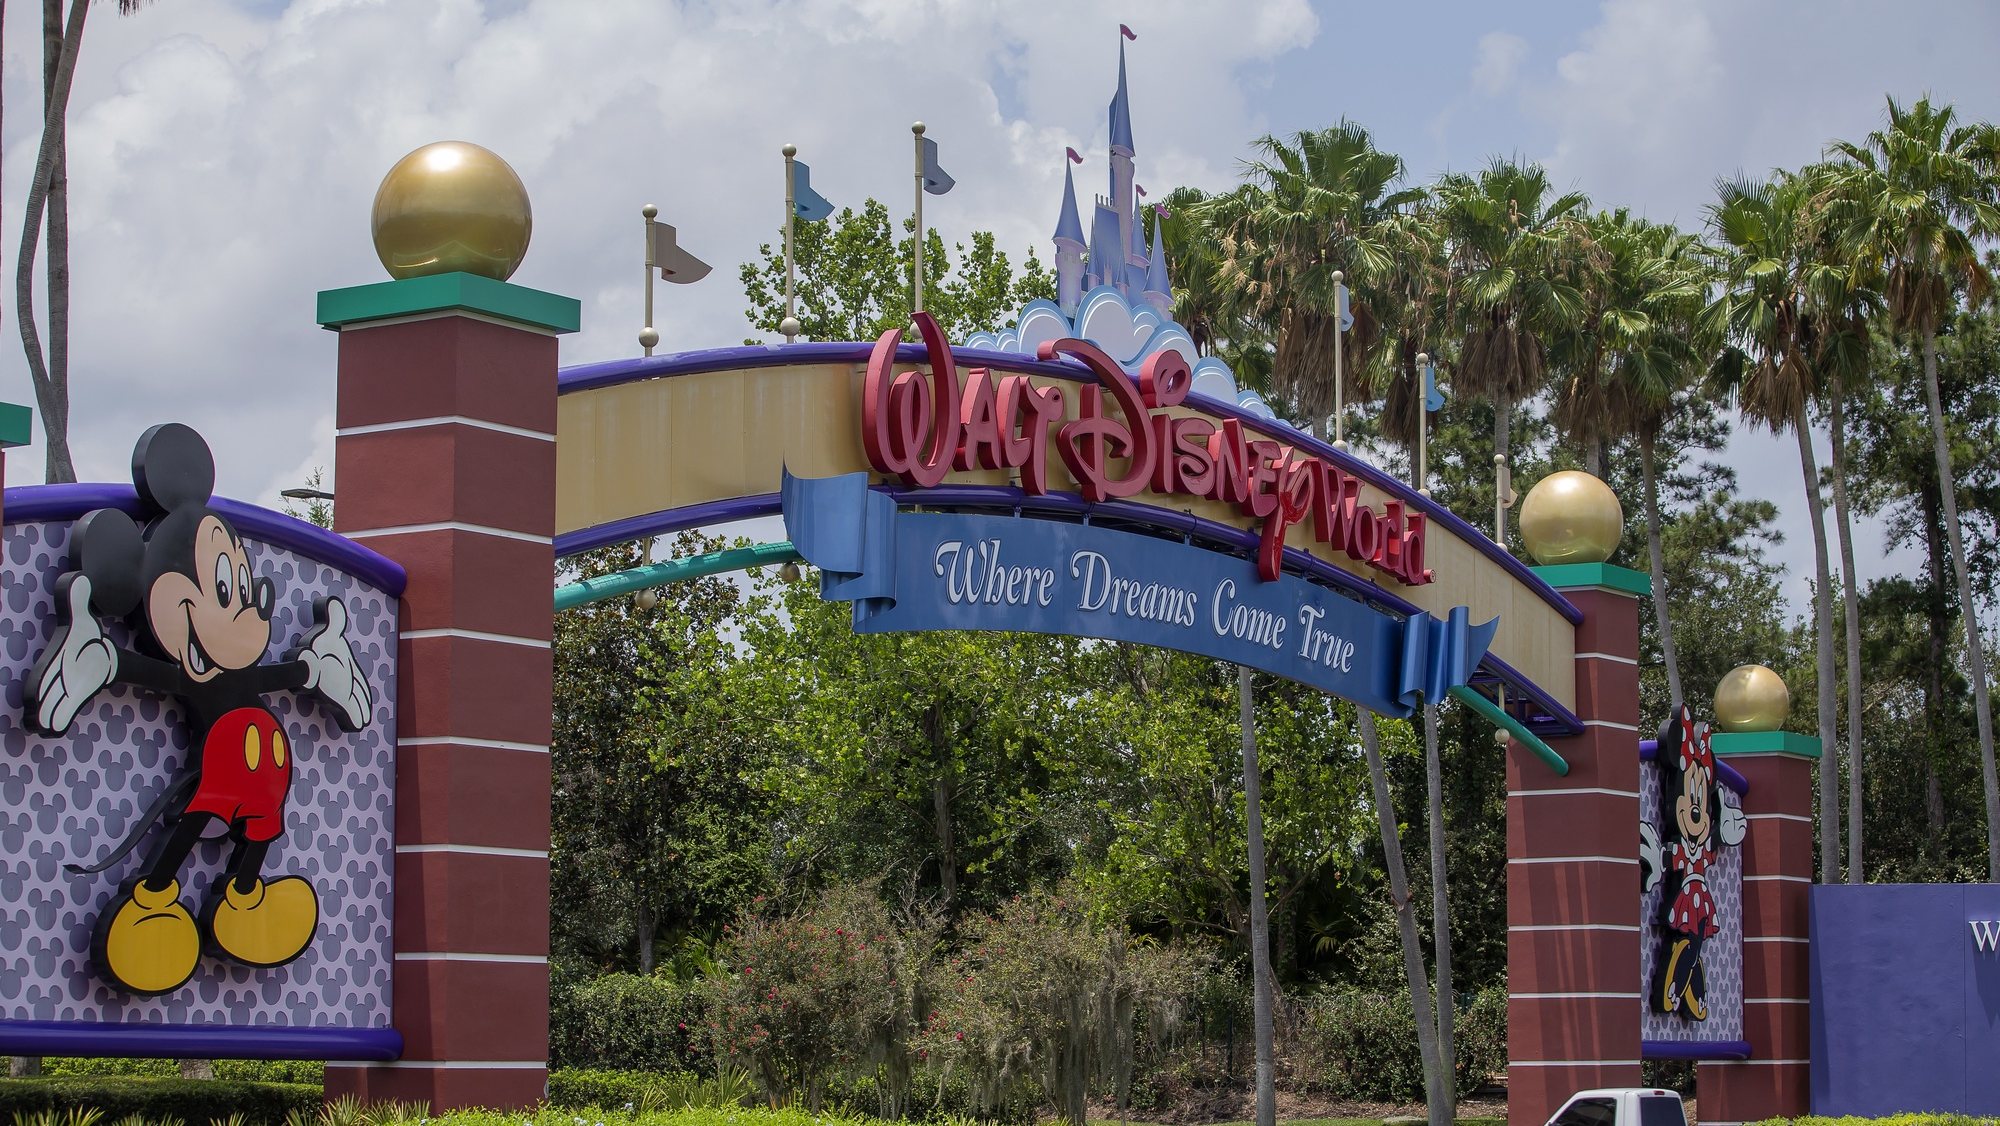 epa08843708 (FILE) - The main entrance to the Walt Disney World Resort of theme parks outside of Orlando, Florida, USA, 28 May 2020 (reissued 26 November 2020). Walt Disney Co, struggling with dwindling numbers of visitors due to Coronavirus, stated 26 November 2020 the company would reduce their workforce and cut some 32,000 jobs within the first six months in 2021. The new total of 32,000 job cuts includes the 28,000 job cuts the company announced in September 2020. Most of the job will be lost at Disney&#039;s theme parks.  EPA/ERIK S. LESSER *** Local Caption *** 56115975